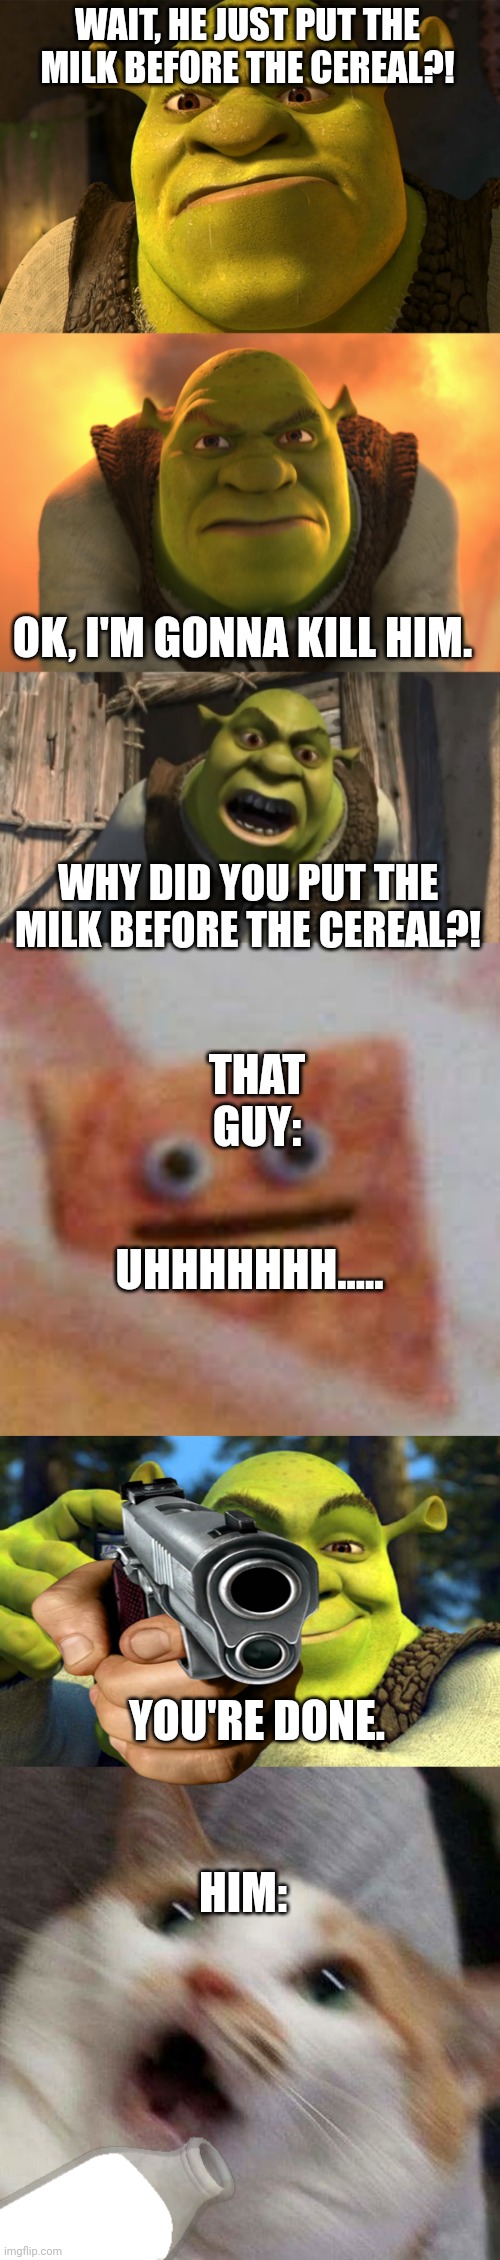 Why did he do that?! | WAIT, HE JUST PUT THE MILK BEFORE THE CEREAL?! OK, I'M GONNA KILL HIM. WHY DID YOU PUT THE MILK BEFORE THE CEREAL?! THAT GUY:; UHHHHHHH..... HIM:; YOU'RE DONE. | image tagged in angry shrek,shrek what are you doing in my swamp,cinnamon toast uhhhhh,shrek camera,very distressed cat | made w/ Imgflip meme maker